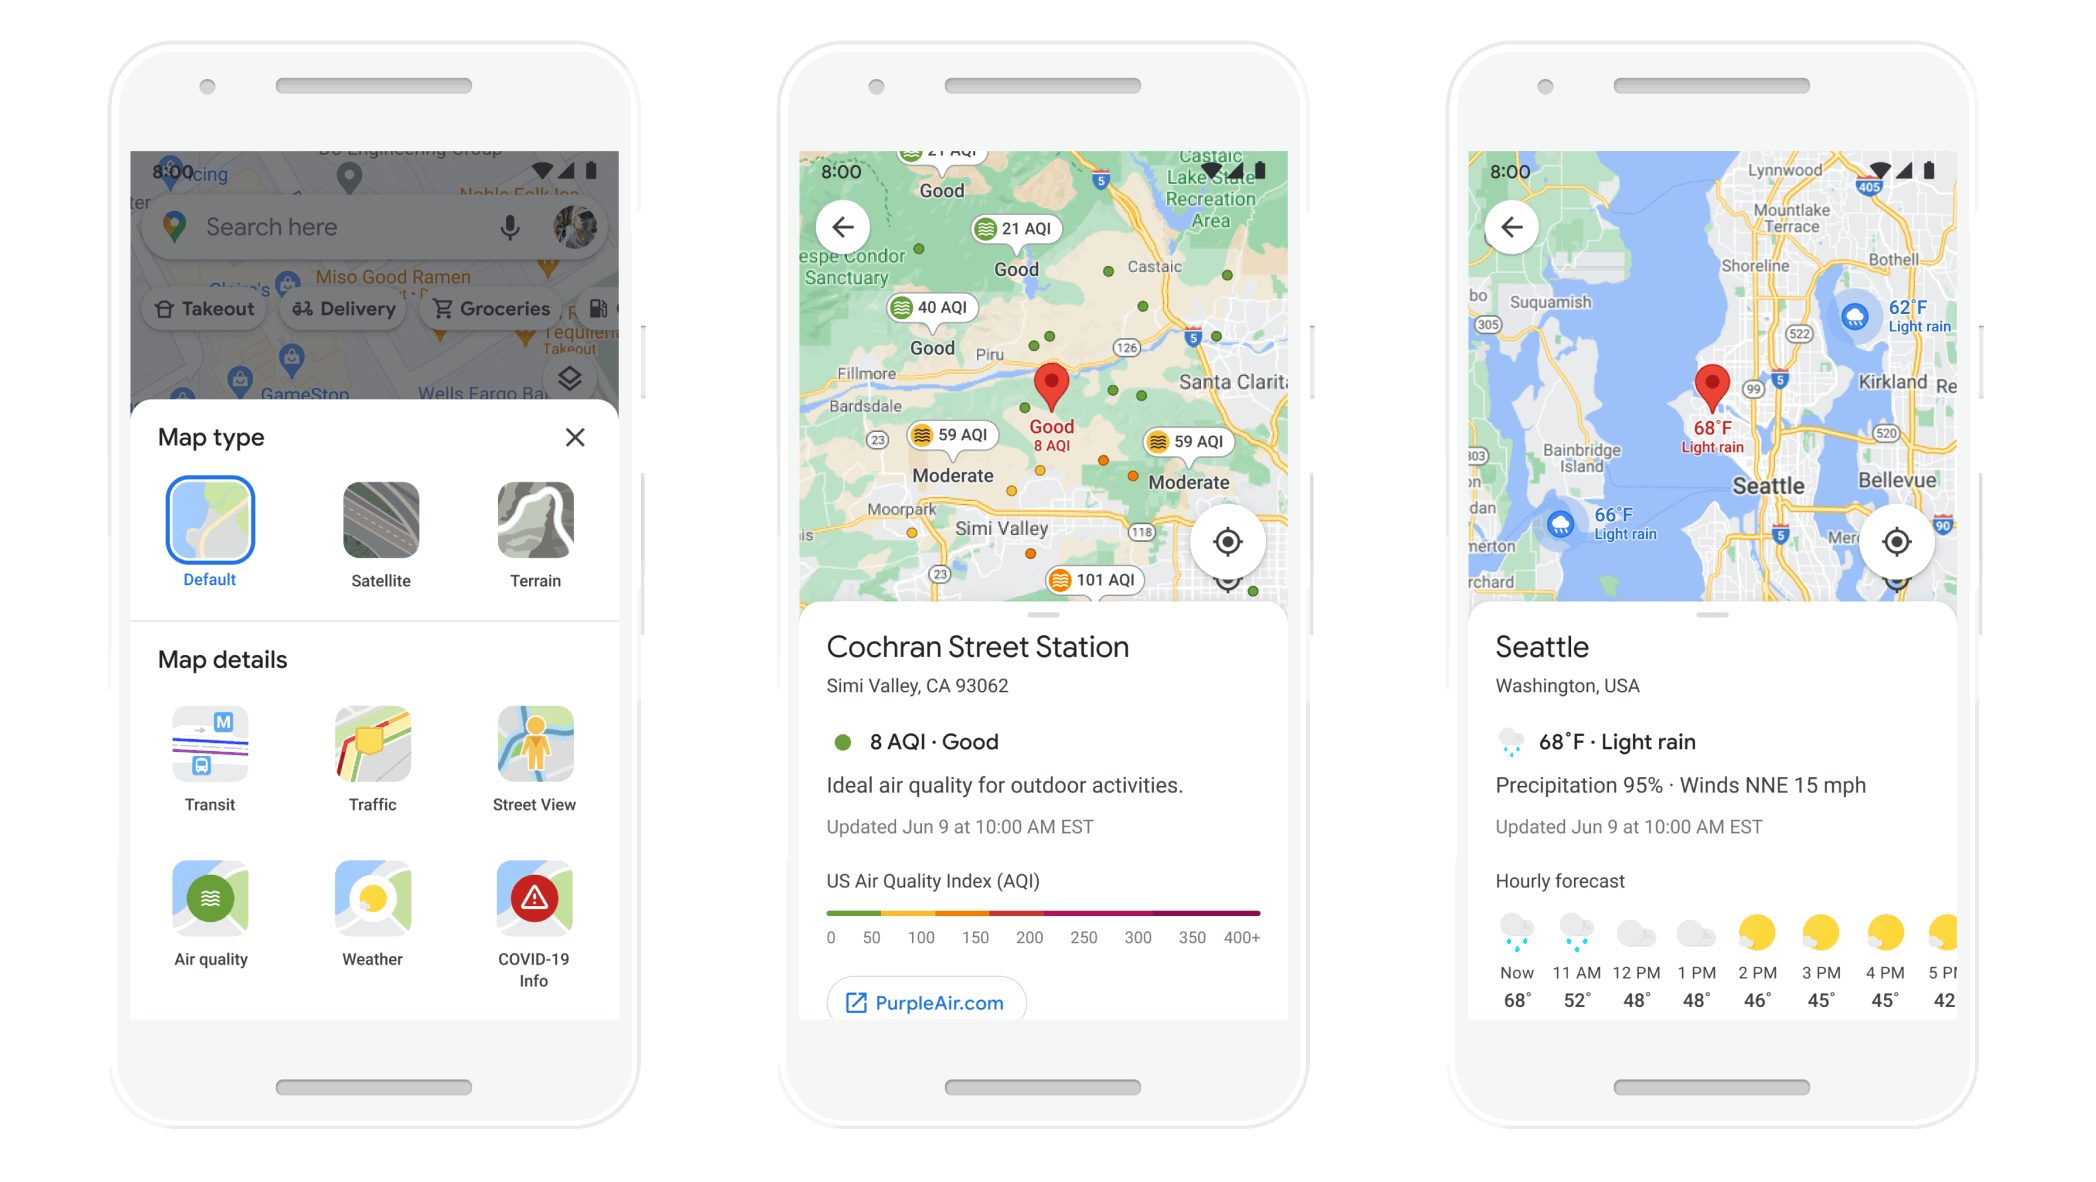 Google announces big upgrades for Google Maps including indoor navigation, eco-friendly routes, and weather information